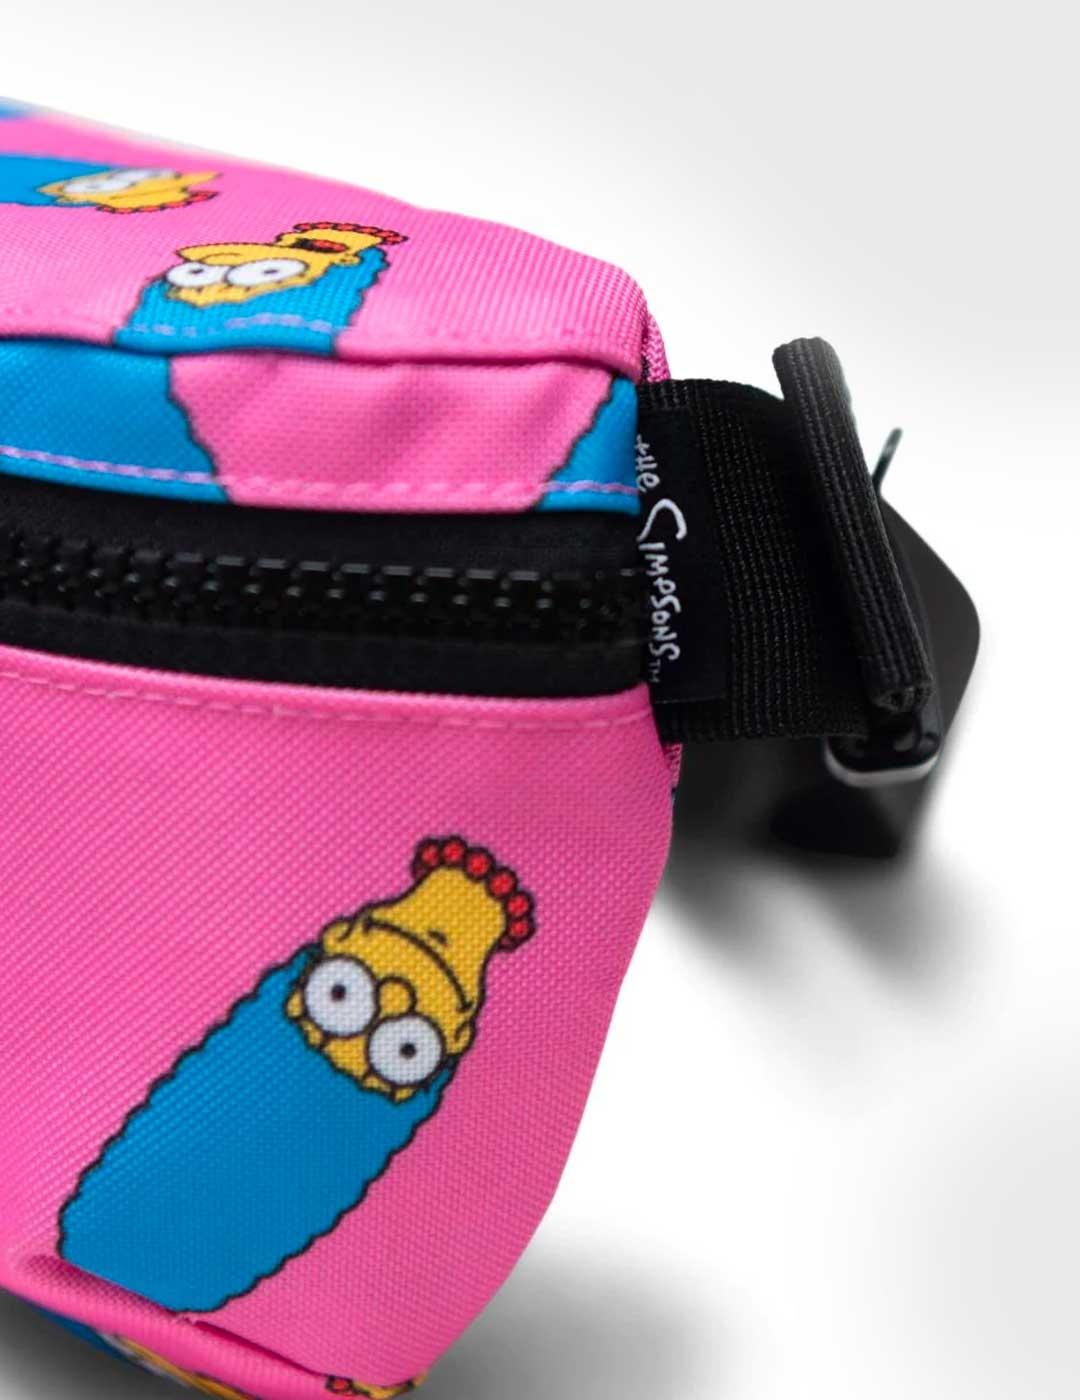 Riñonera Herschell Marge Simpson rosa para hombre y mujer